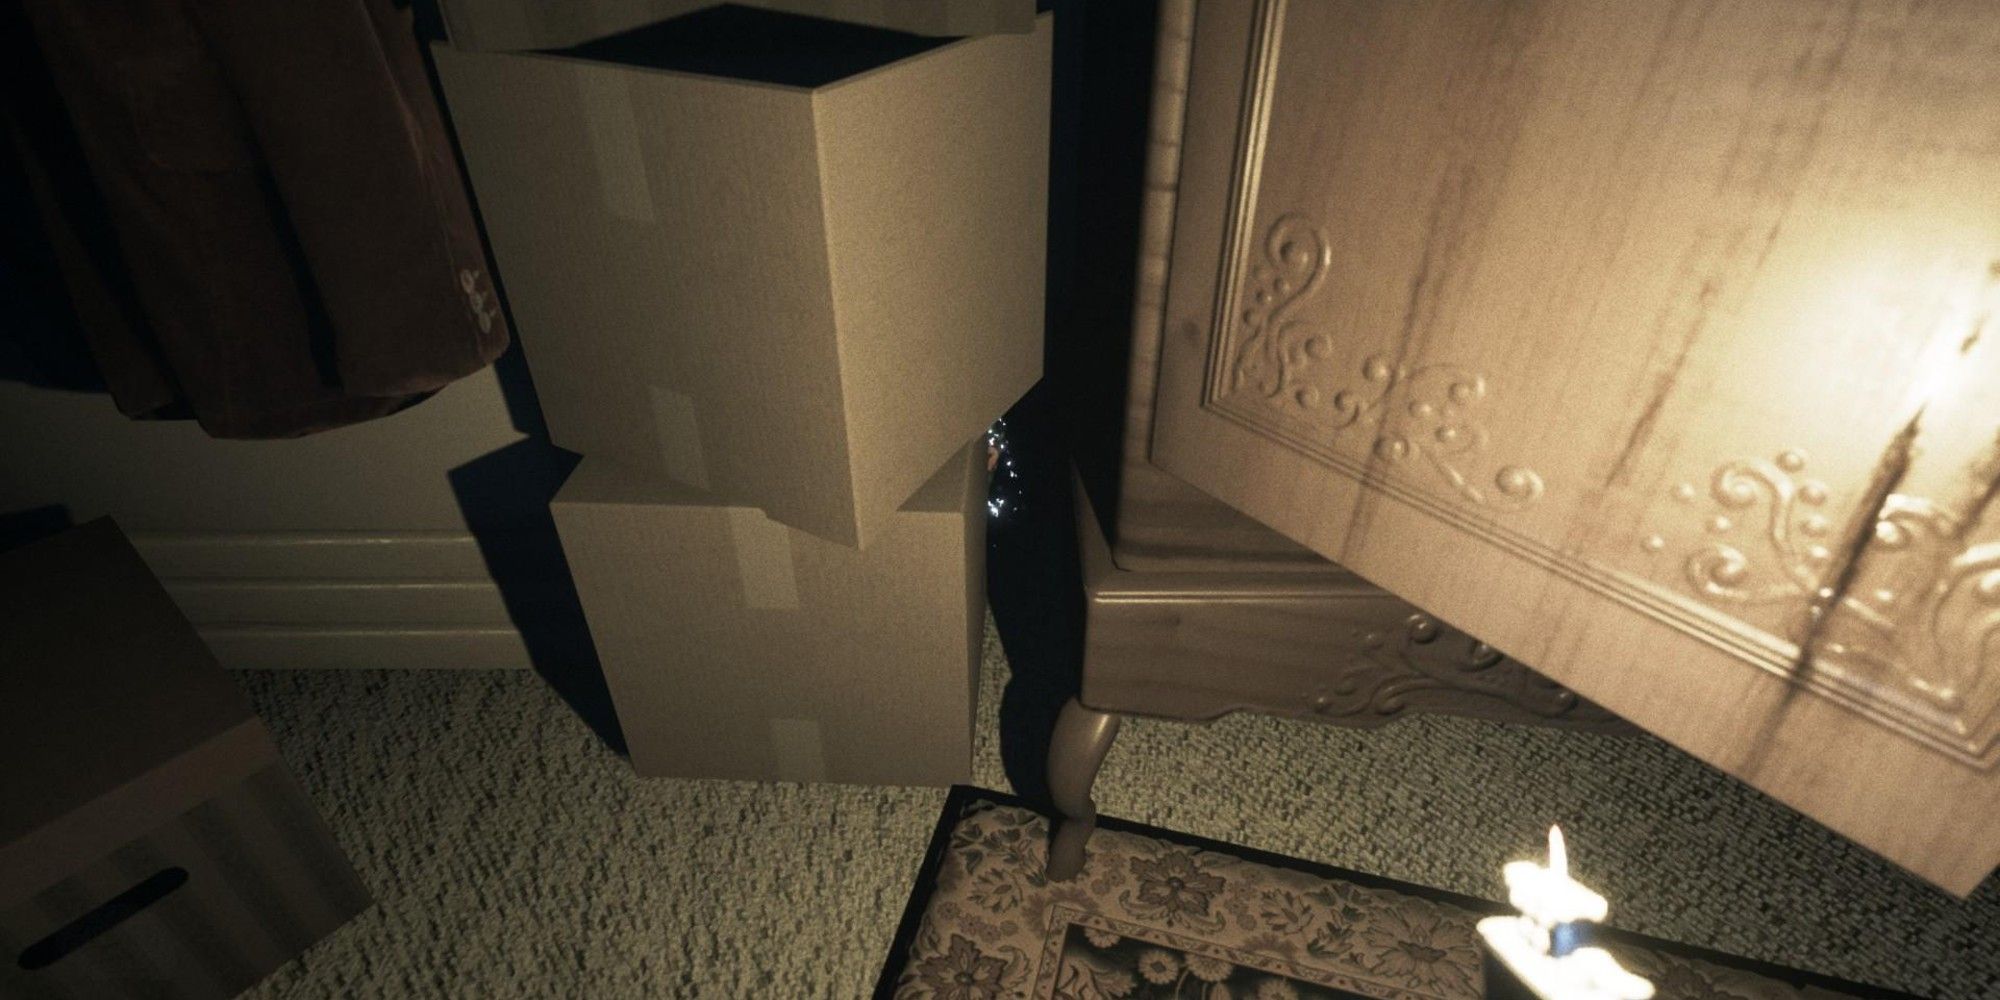 A Matryoshka doll hidden in the Son's Room by some boxes in Visage